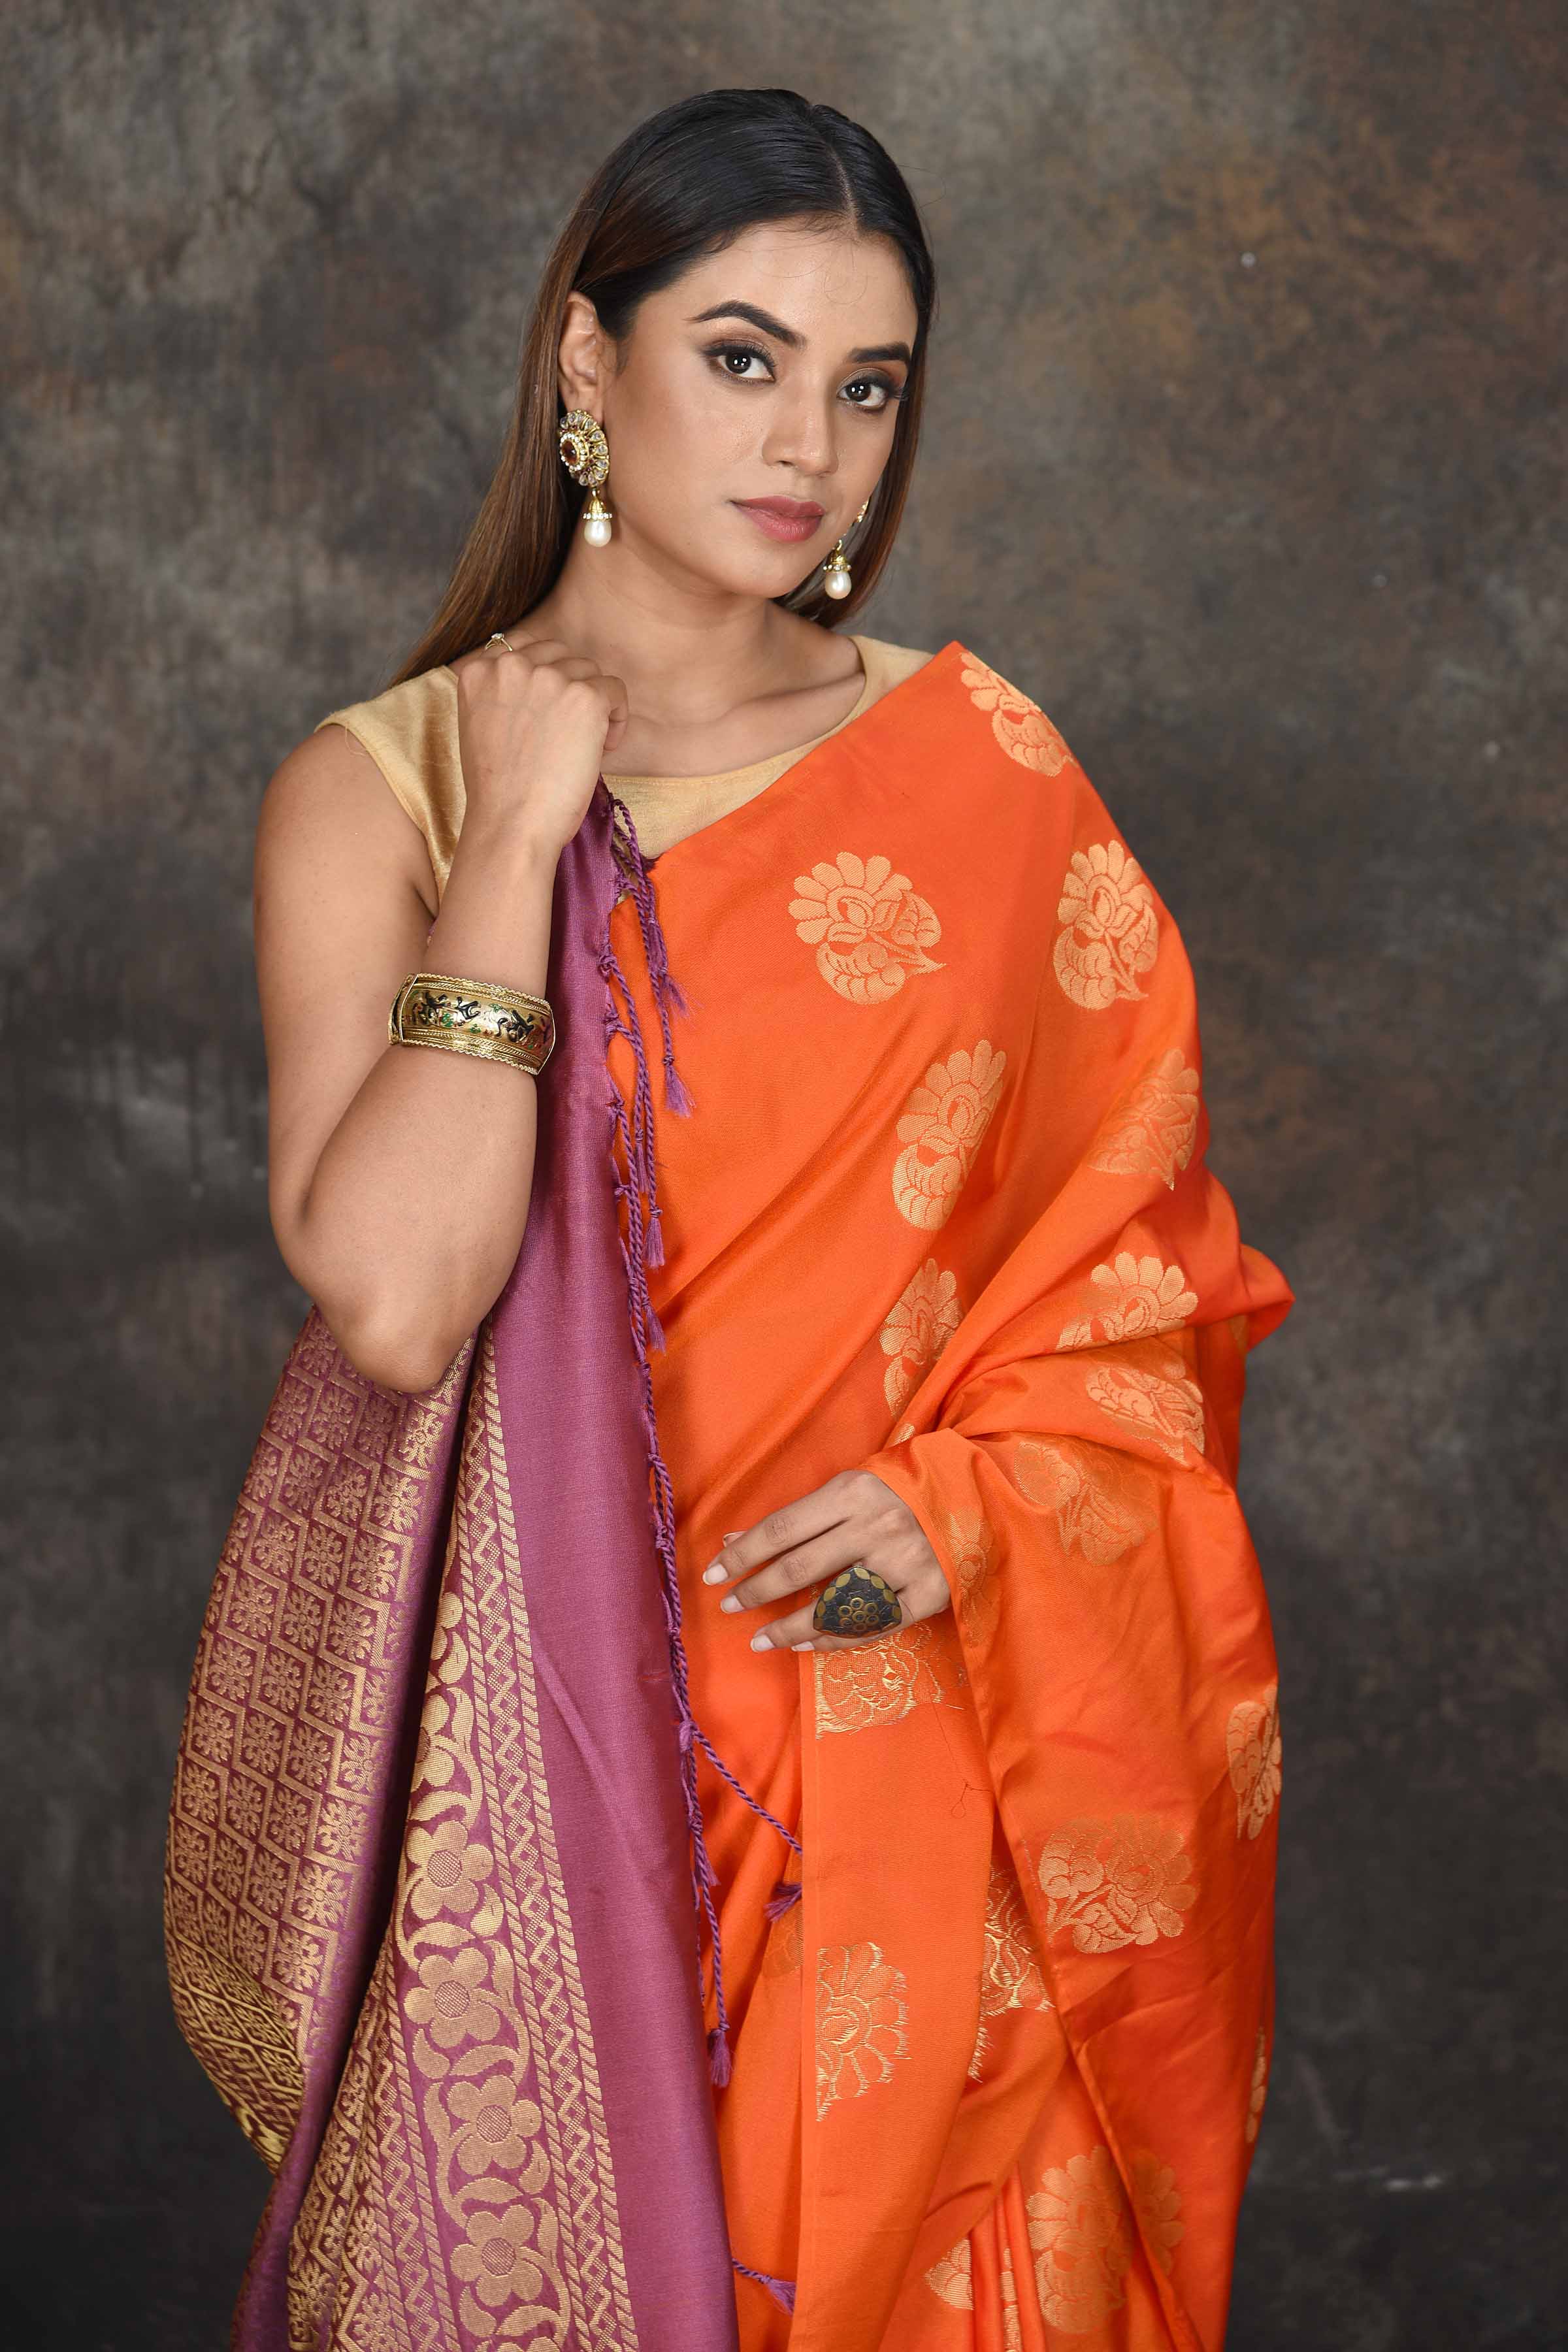 Buy stunning orange Kanjivaram soft silk sari online in USA with purple zari border. Be the center of attraction on special occasions in ethnic sarees, designer sarees, embroidered sarees, handwoven sarees, pure silk sarees from Pure Elegance Indian saree store in USA.-closeup